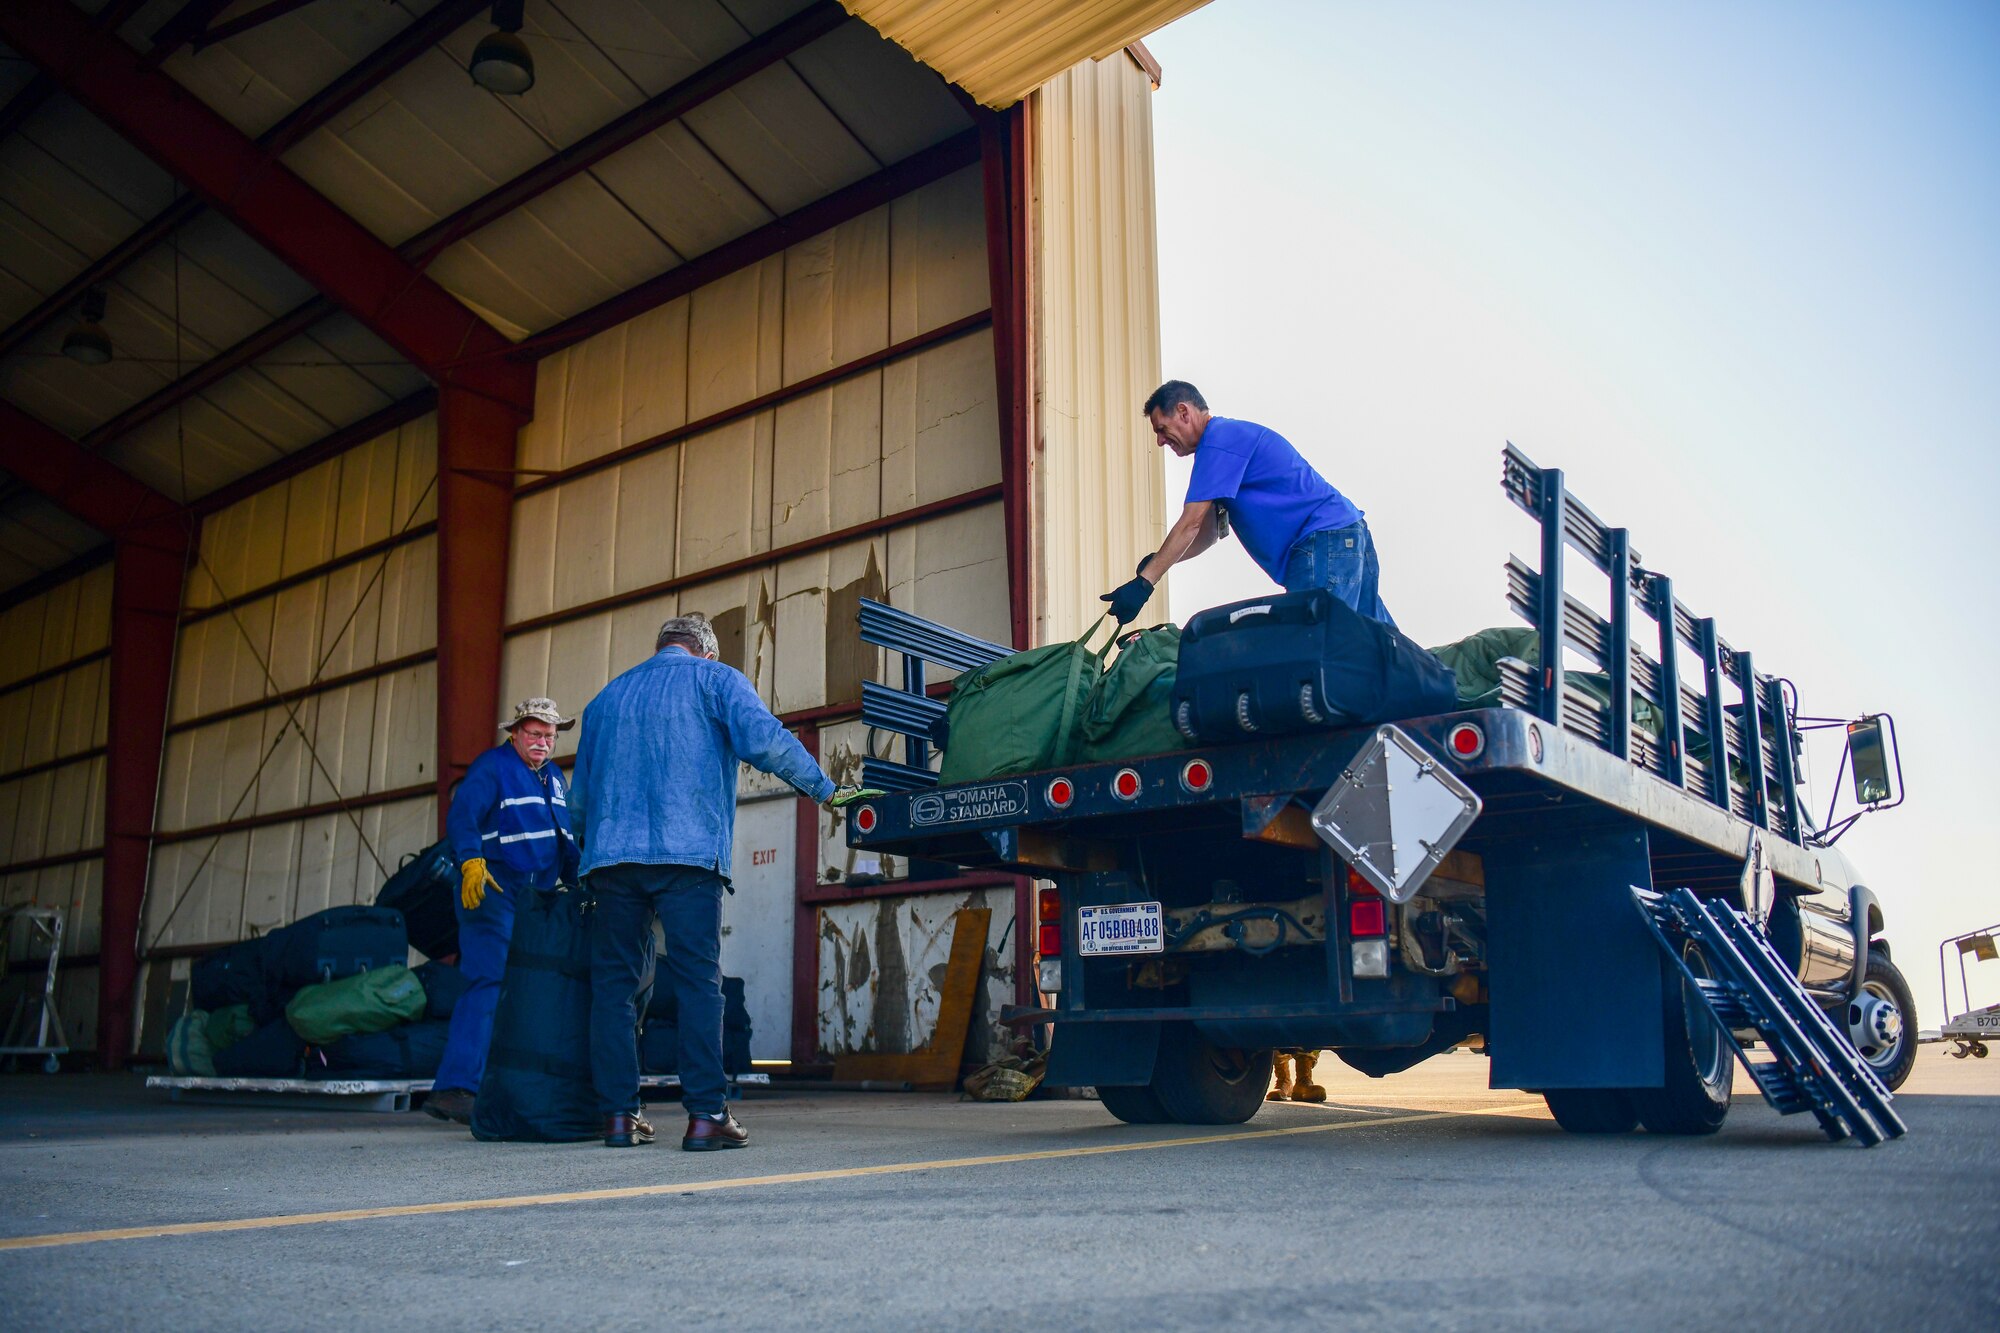 Civilians work together load equipment on to a pallet during an exercise